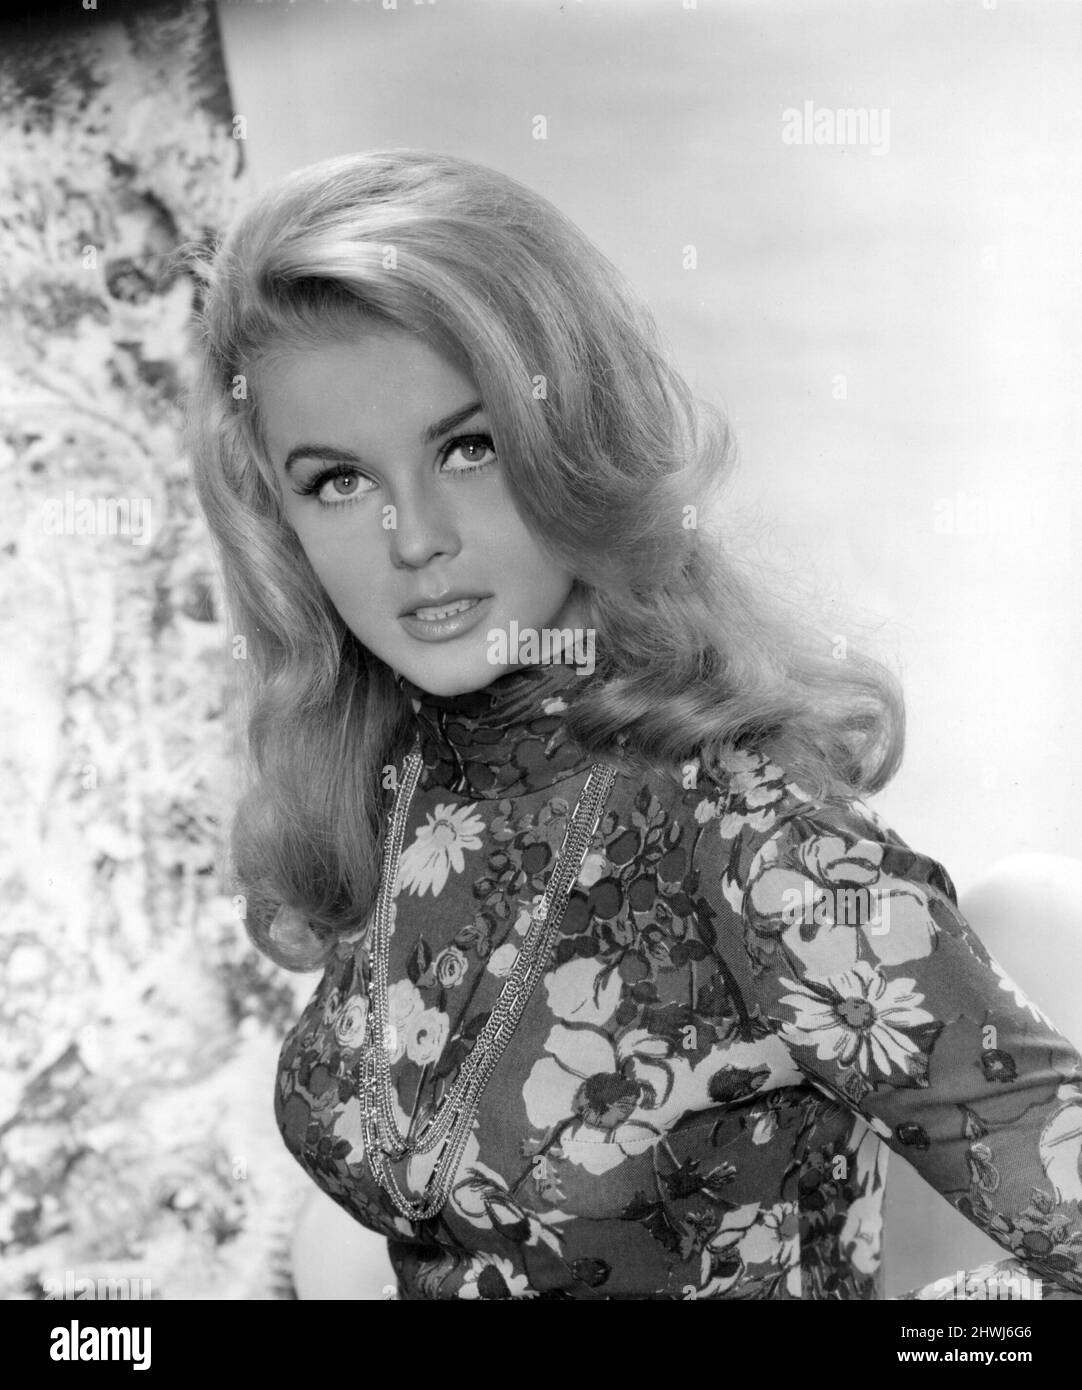 ANN-MARGRET in THE PLEASURE SEEKERS (1964), directed by JEAN NEGULESCO. Credit: 20TH CENTURY FOX / Album Stock Photo